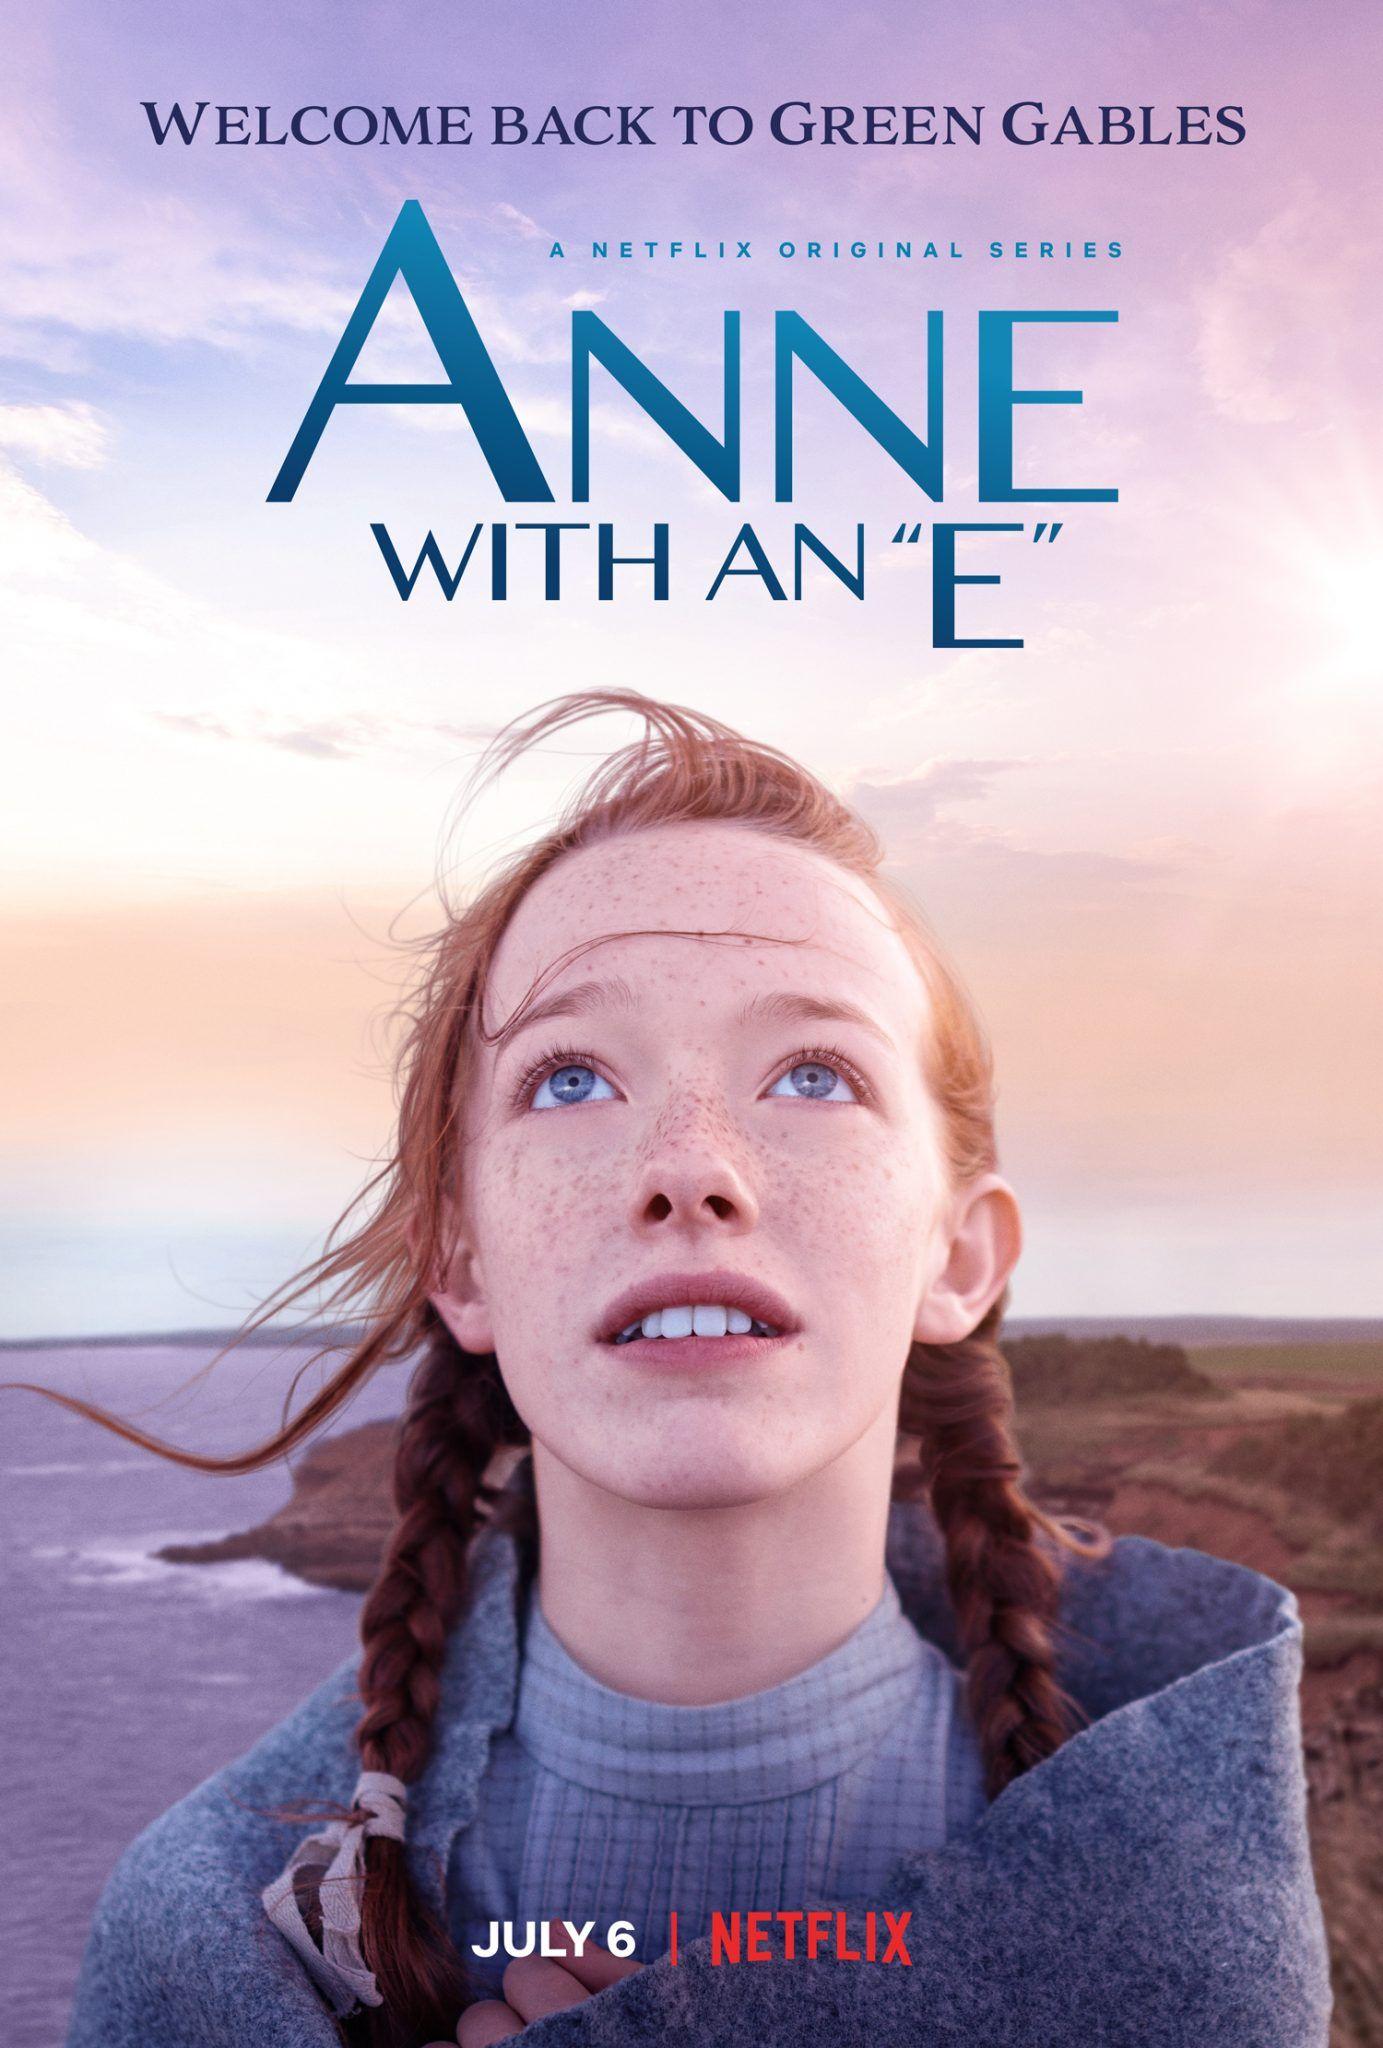 Anne With an E” Will Return to Green Gables on July 6th